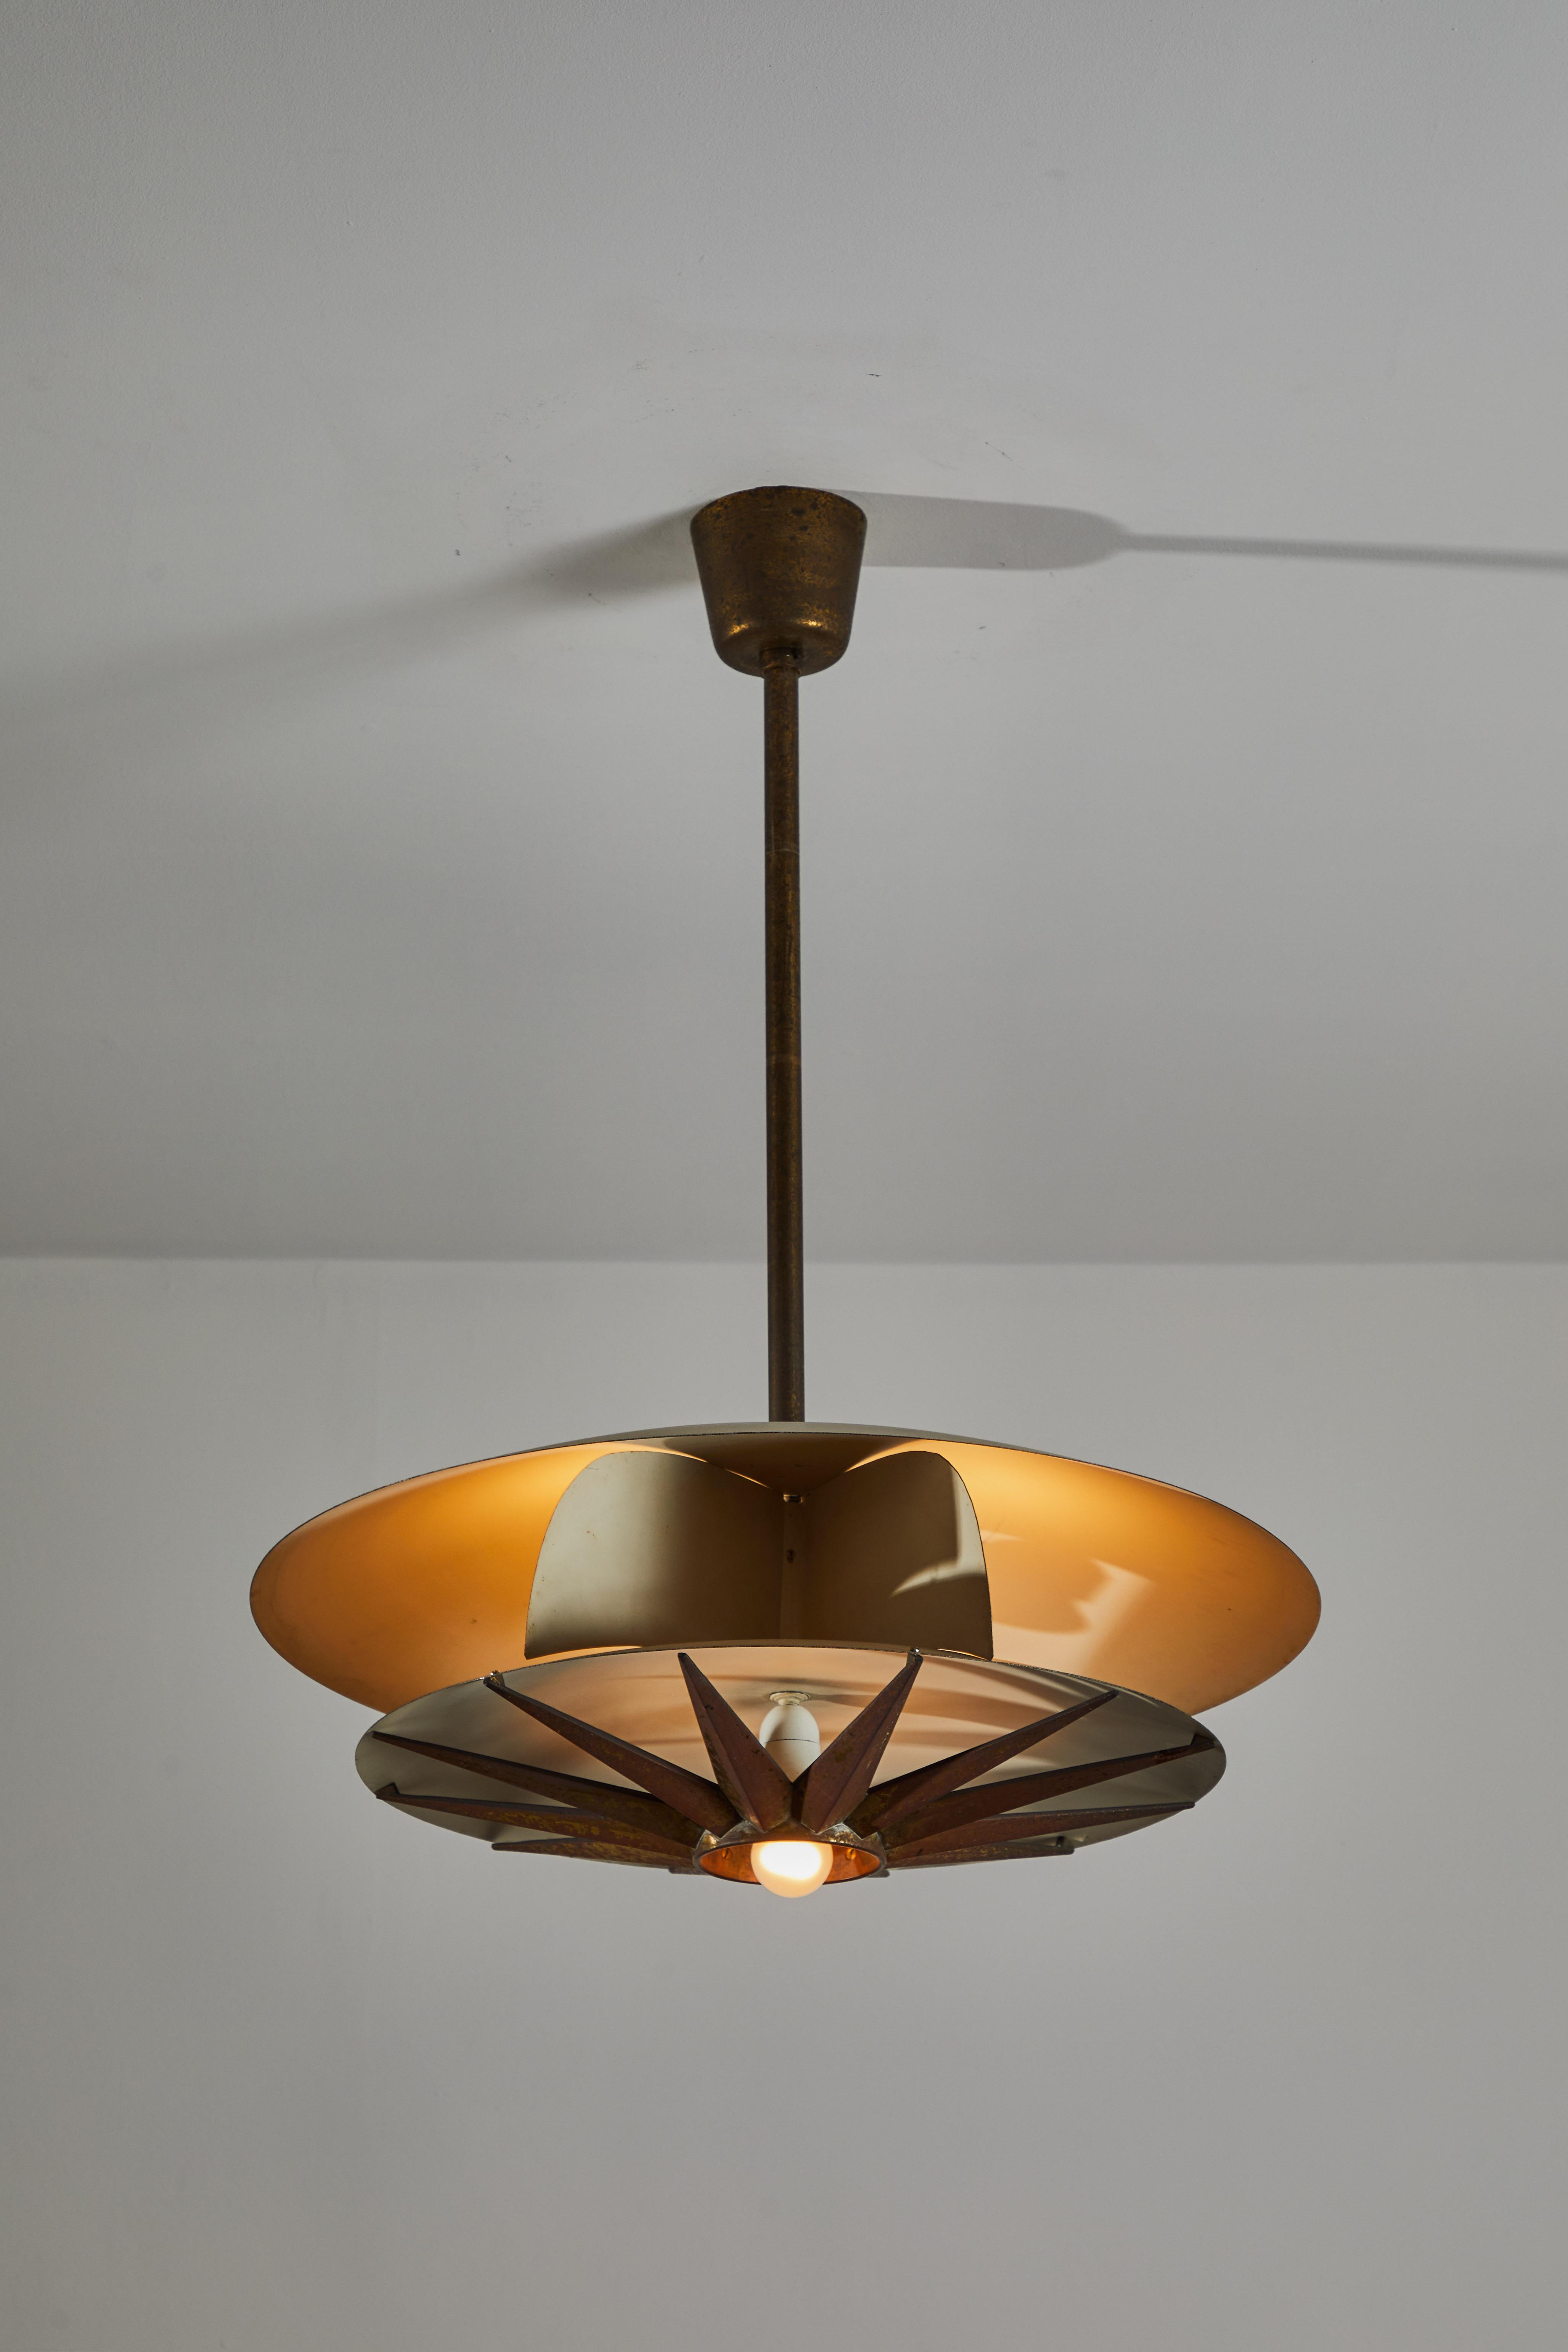 Single rare pendant by Tomaso Buzzi. Designed and manufactured in Italy, circa 1950s. Enameled metal, brass. Rewired for U.S. standards. Original canopy. We recommend four E27 65w maximum bulbs. Priced and sold as single lights. Only one light